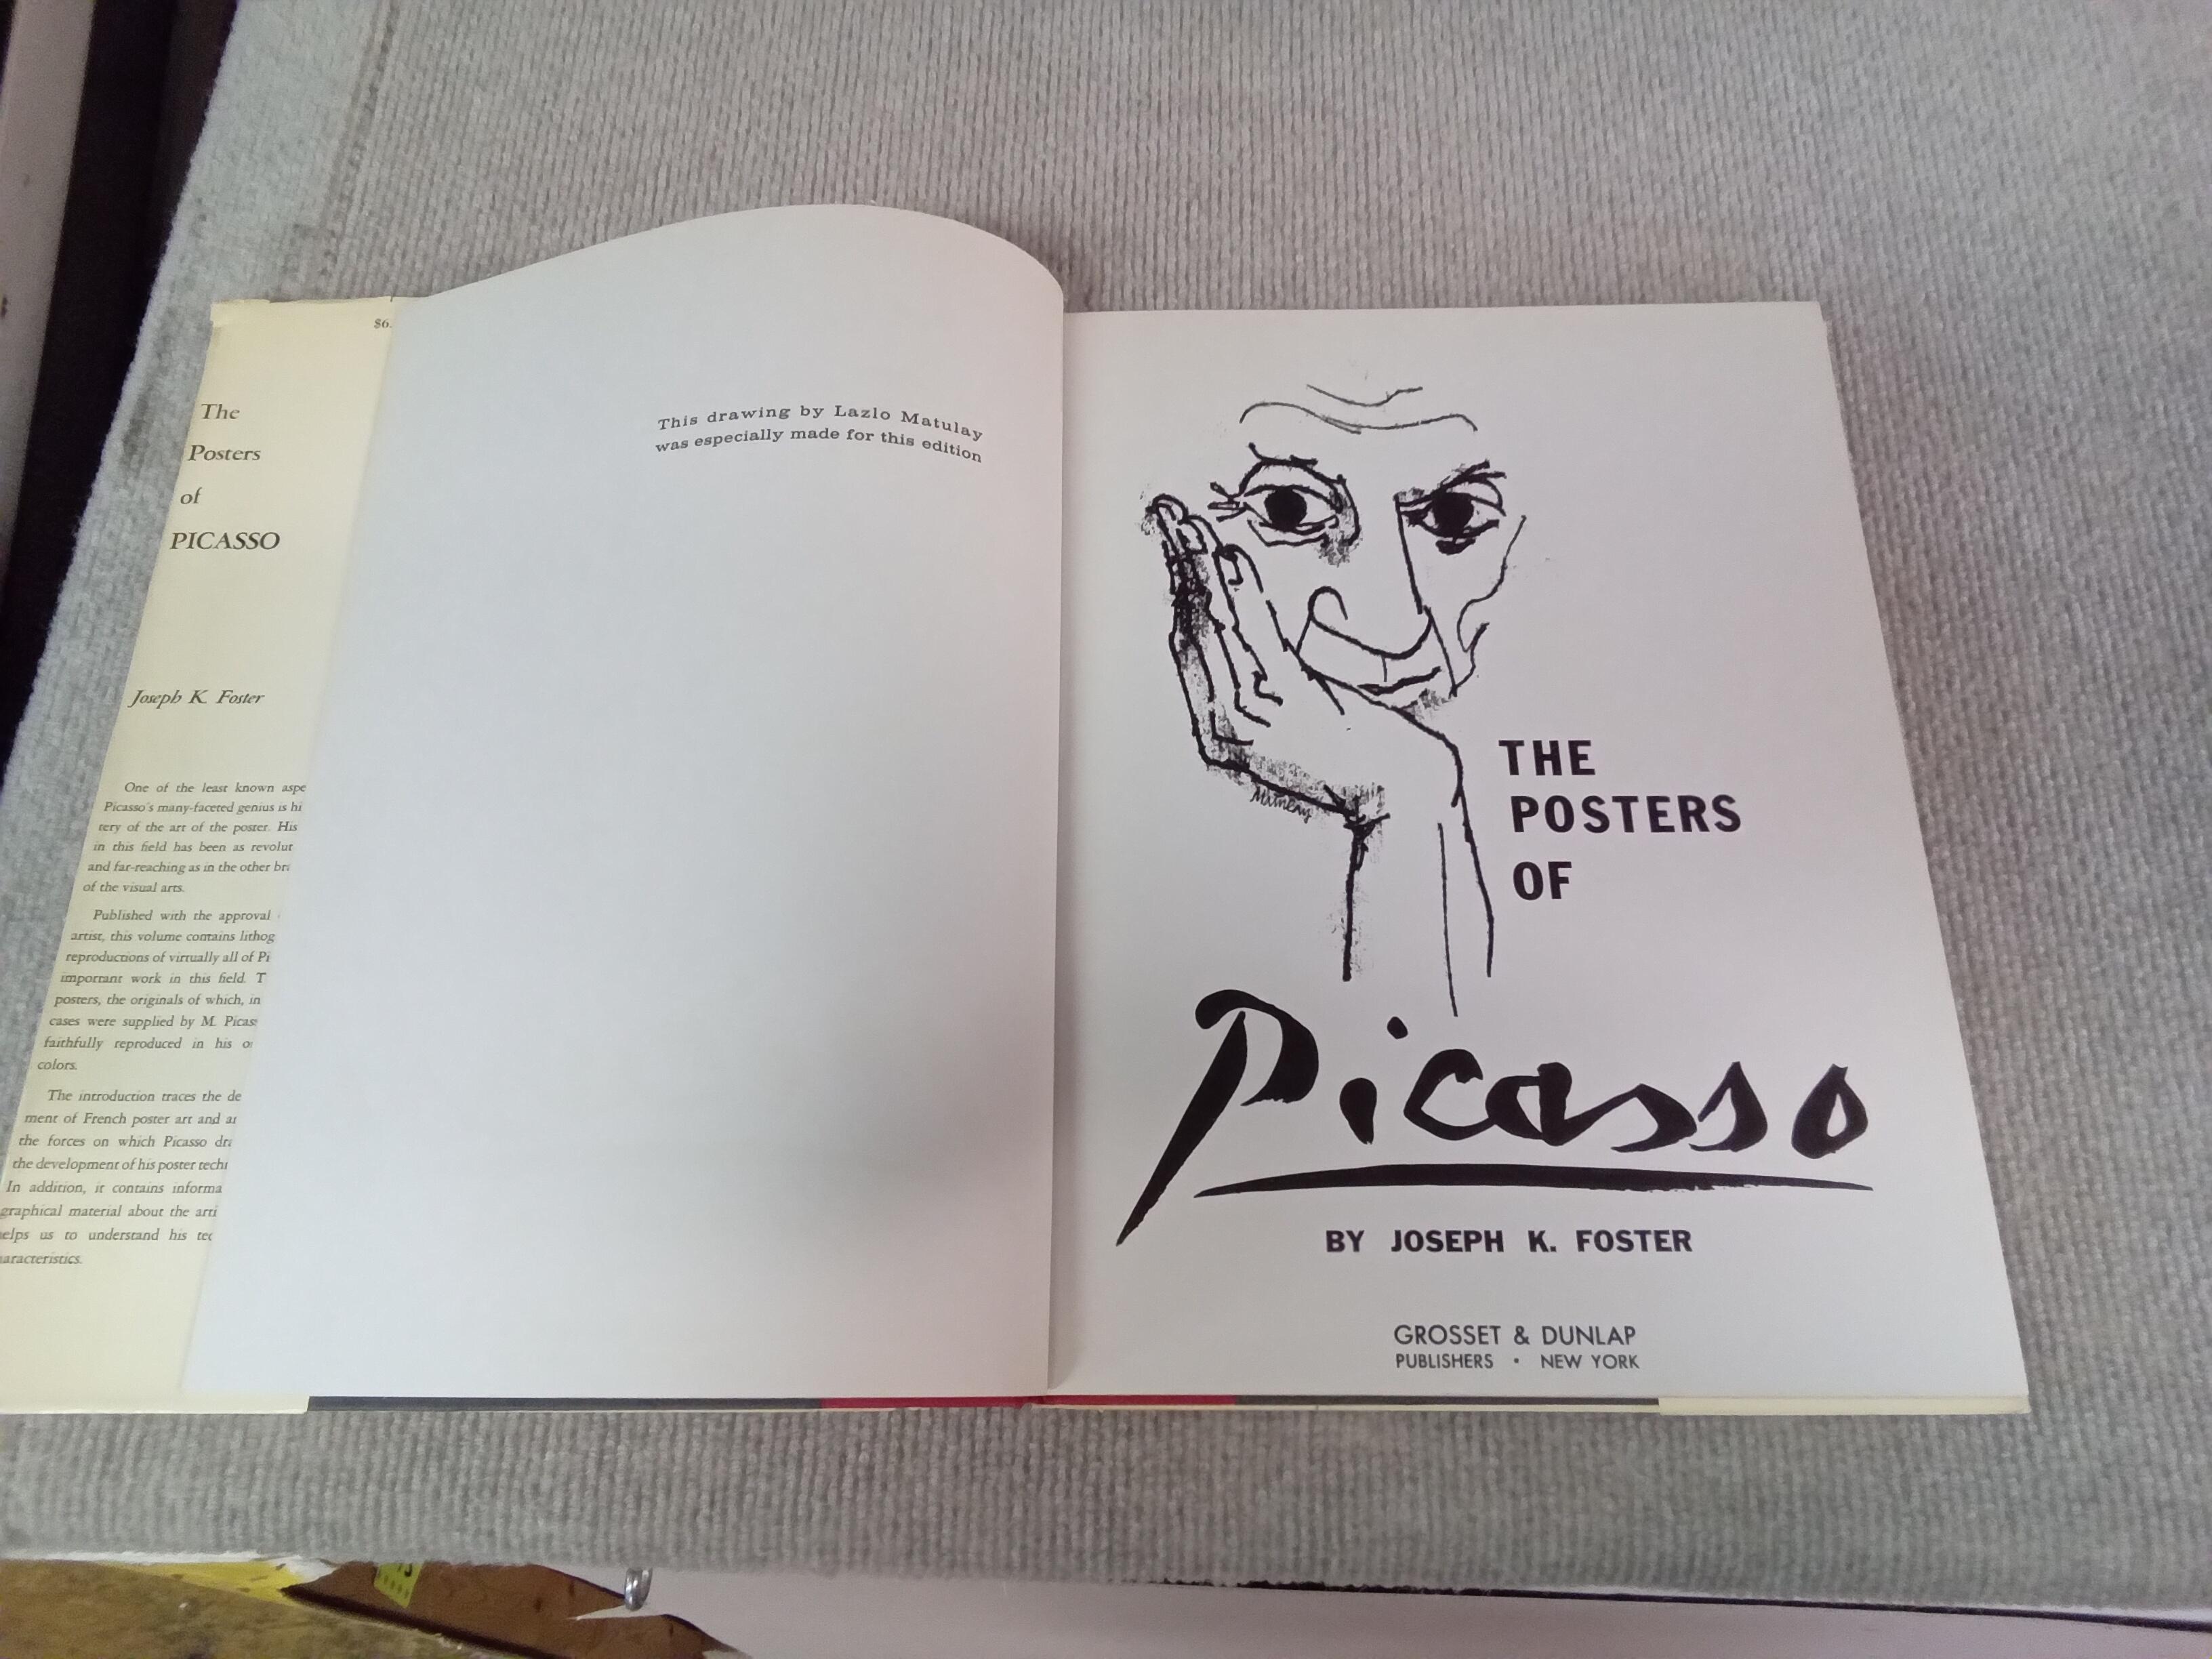 1964 Nach Pablo Picasso 'The Posters of Picasso' Kubismus Buch im Angebot 9